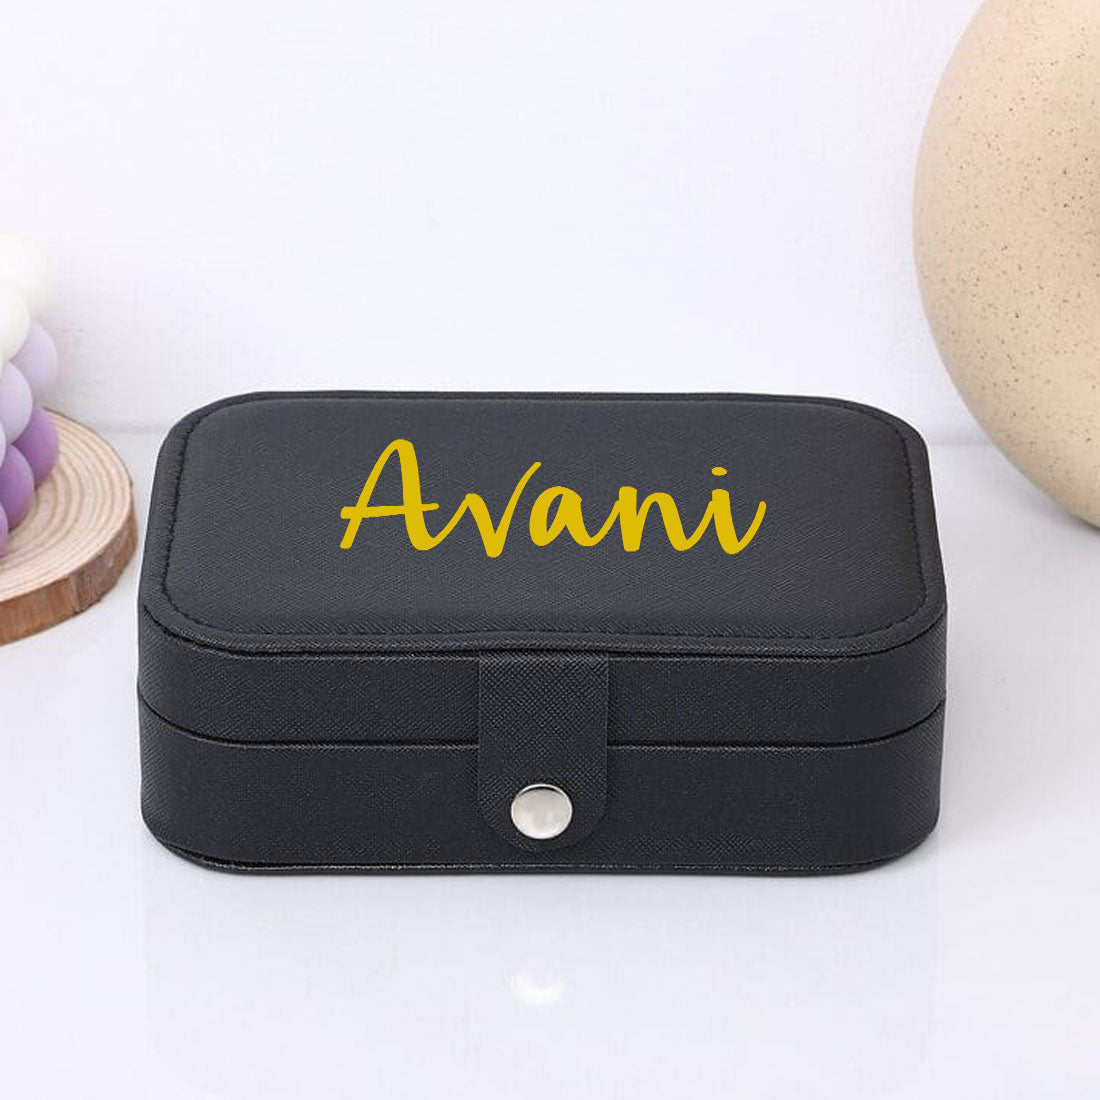 Personalised jewellery Box Organizer for Travel  Jewelry Storage Case For Earrings Rings Pendants